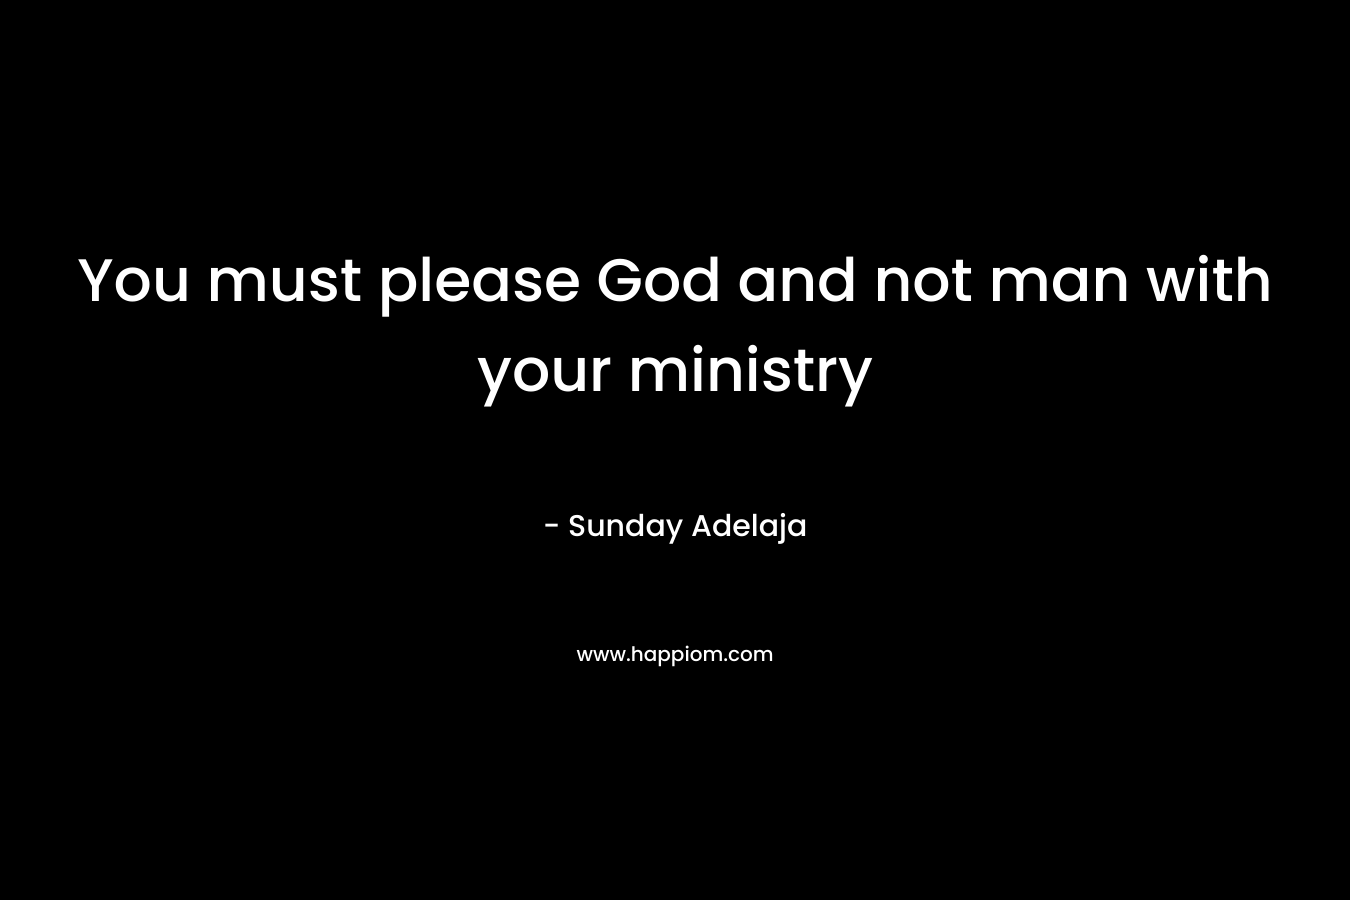 You must please God and not man with your ministry